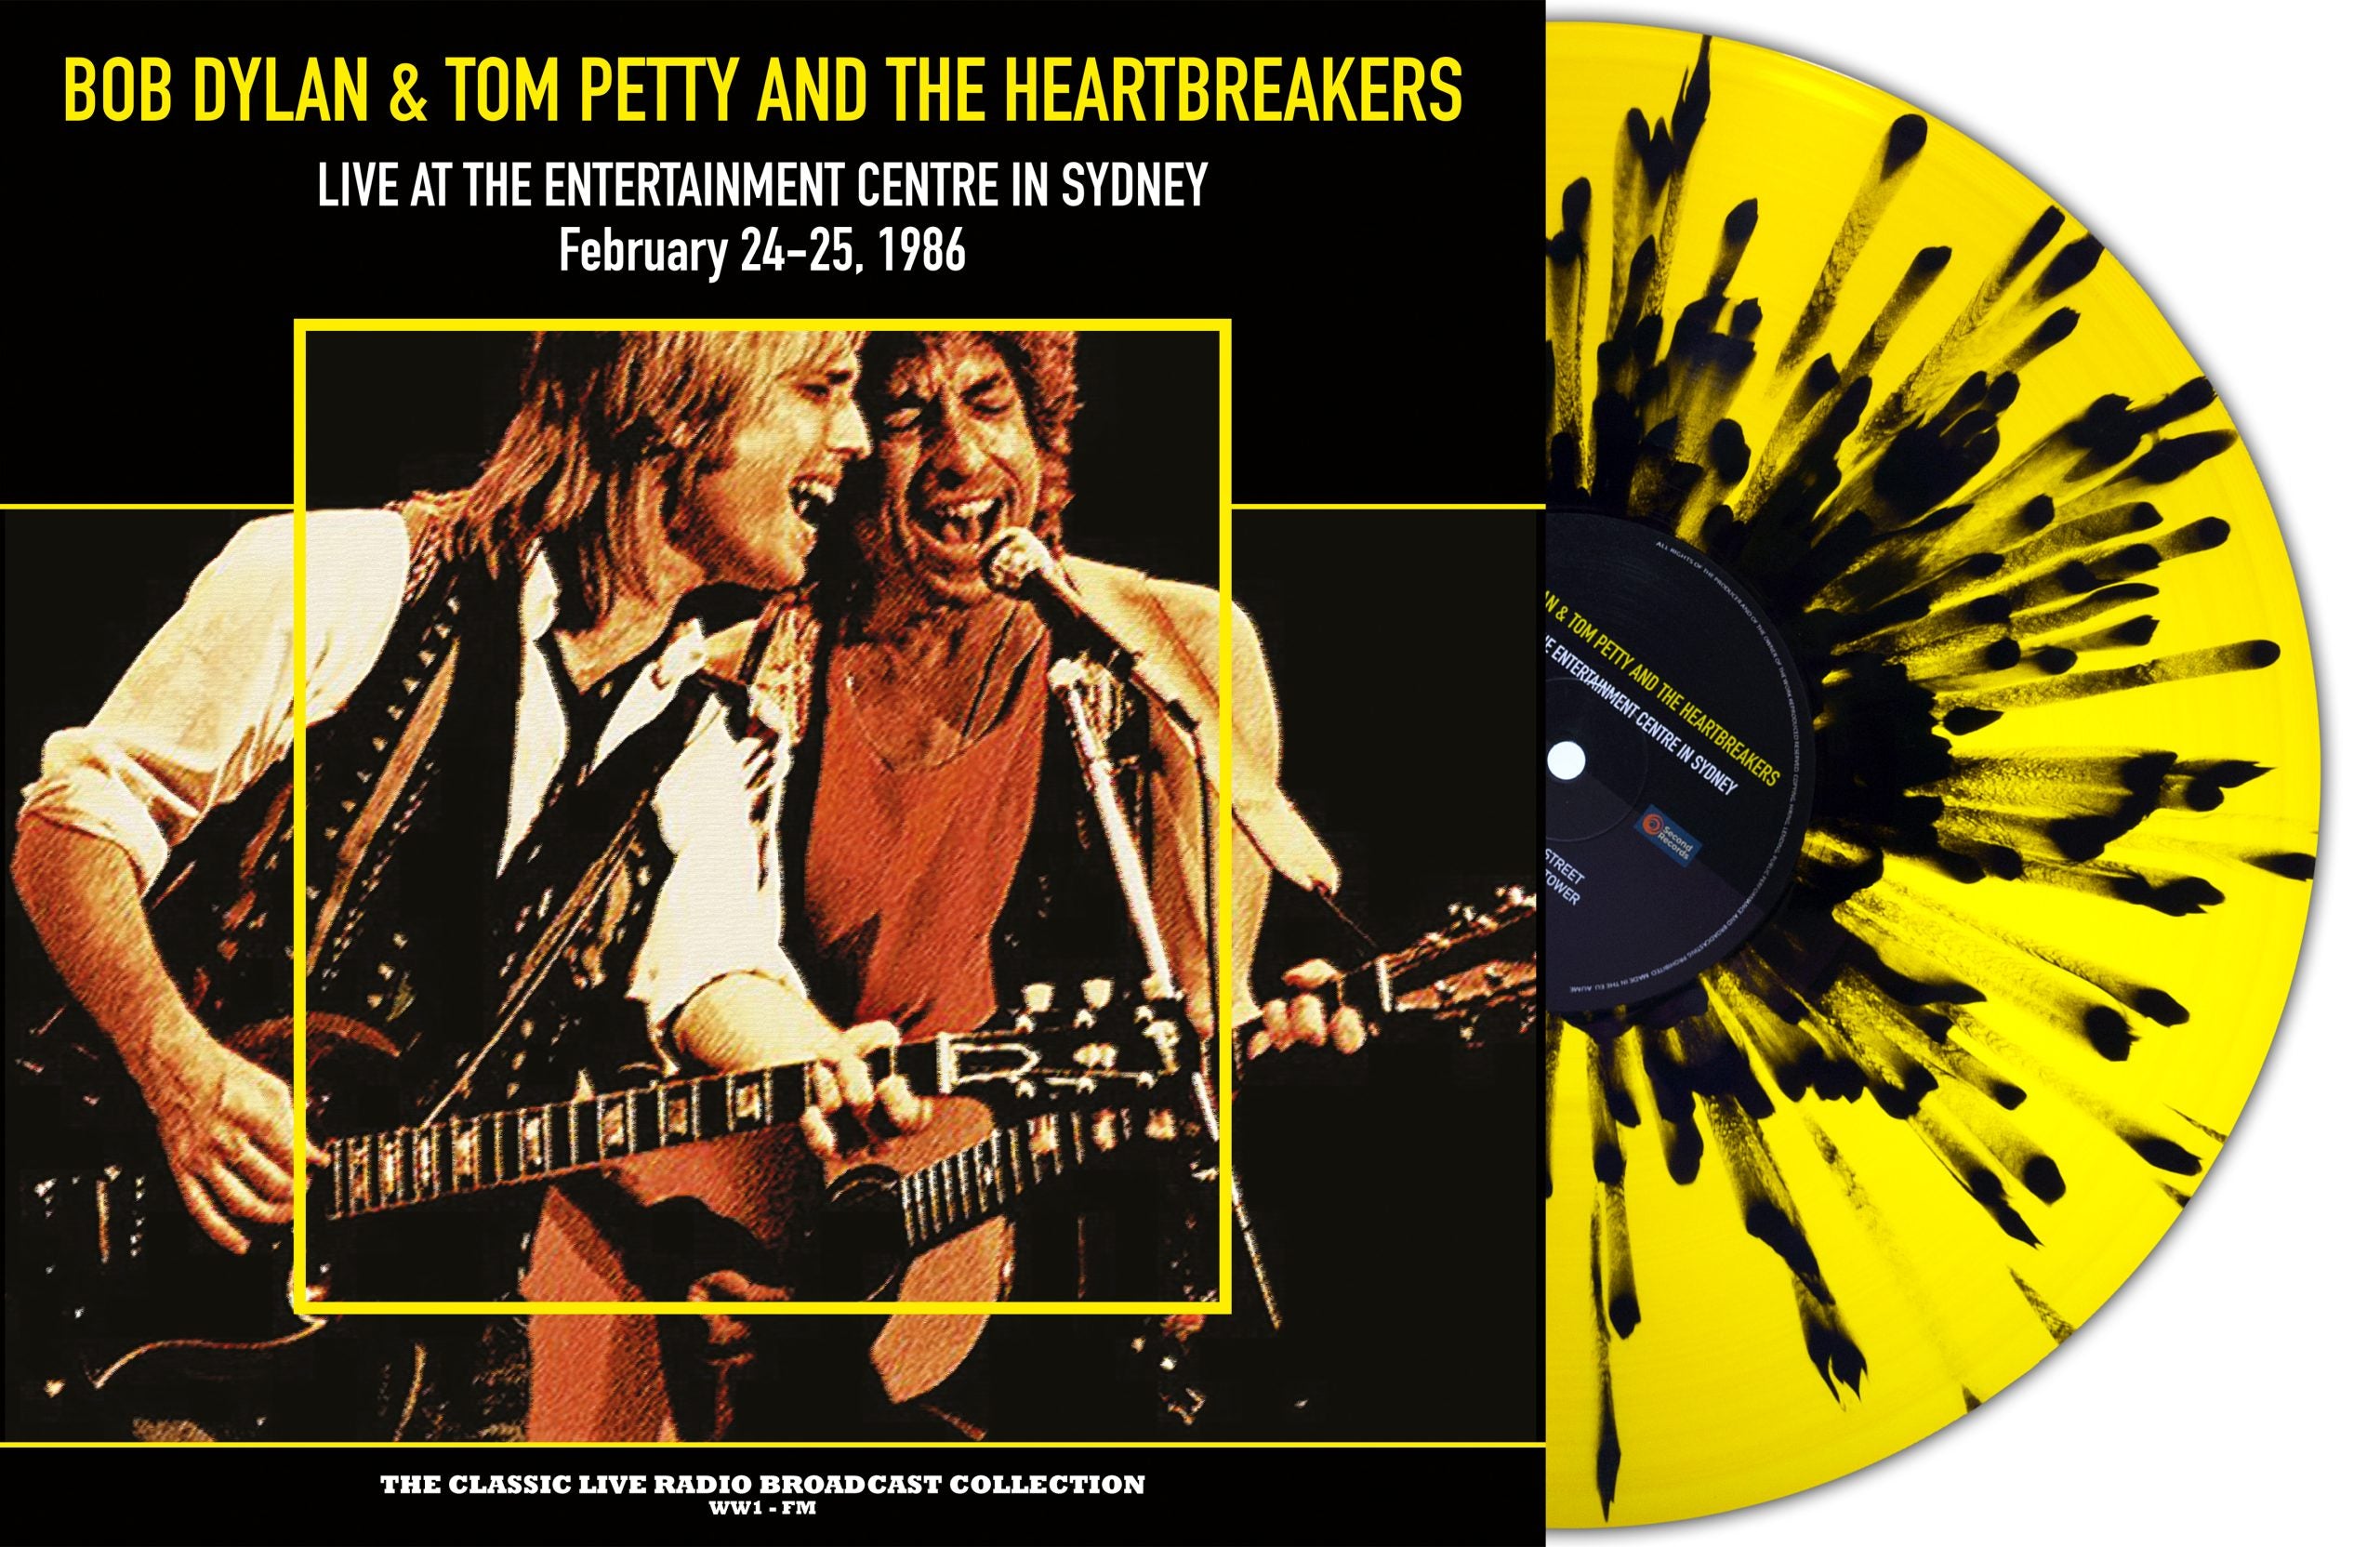 Bob Dylan/Tom Petty & The Heartbreakers - Live At The Entertainment Centre Sydney 1986 [2LP] Limited Hand-Numbered 180gram Yellow/Black Splatter Colored Vinyl